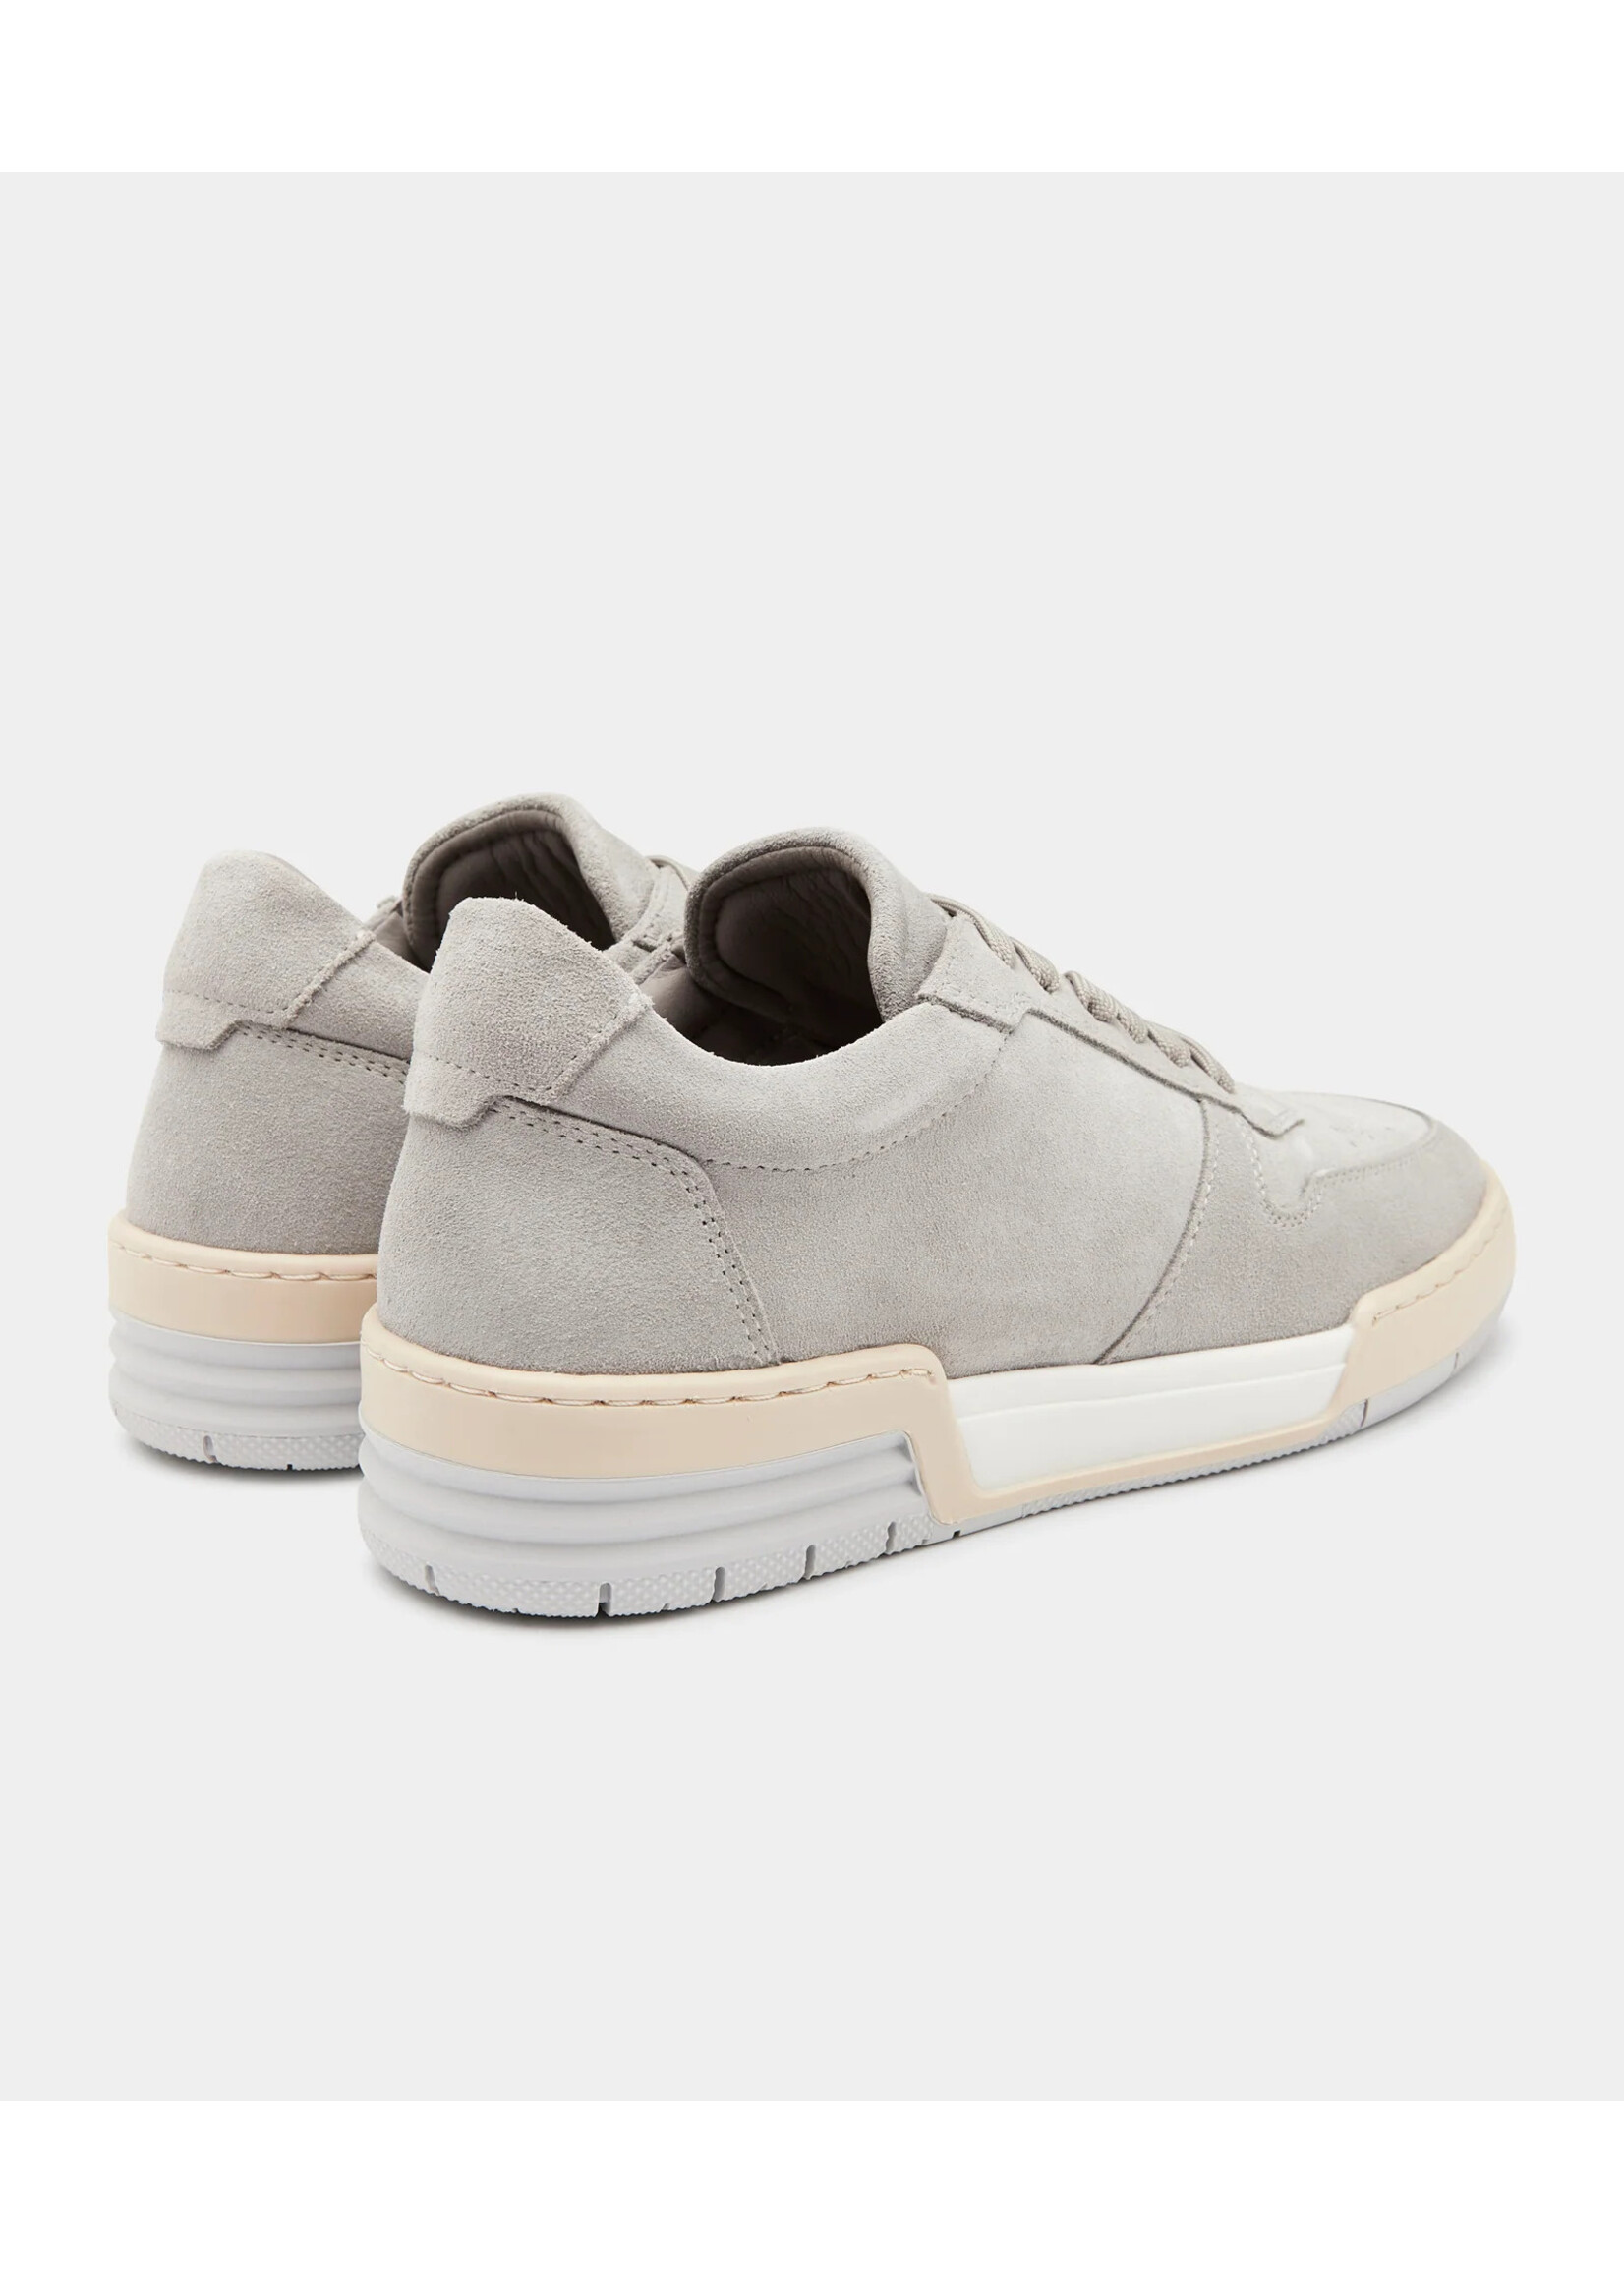 Garment Project Legacy 80s  - Light Grey Suede